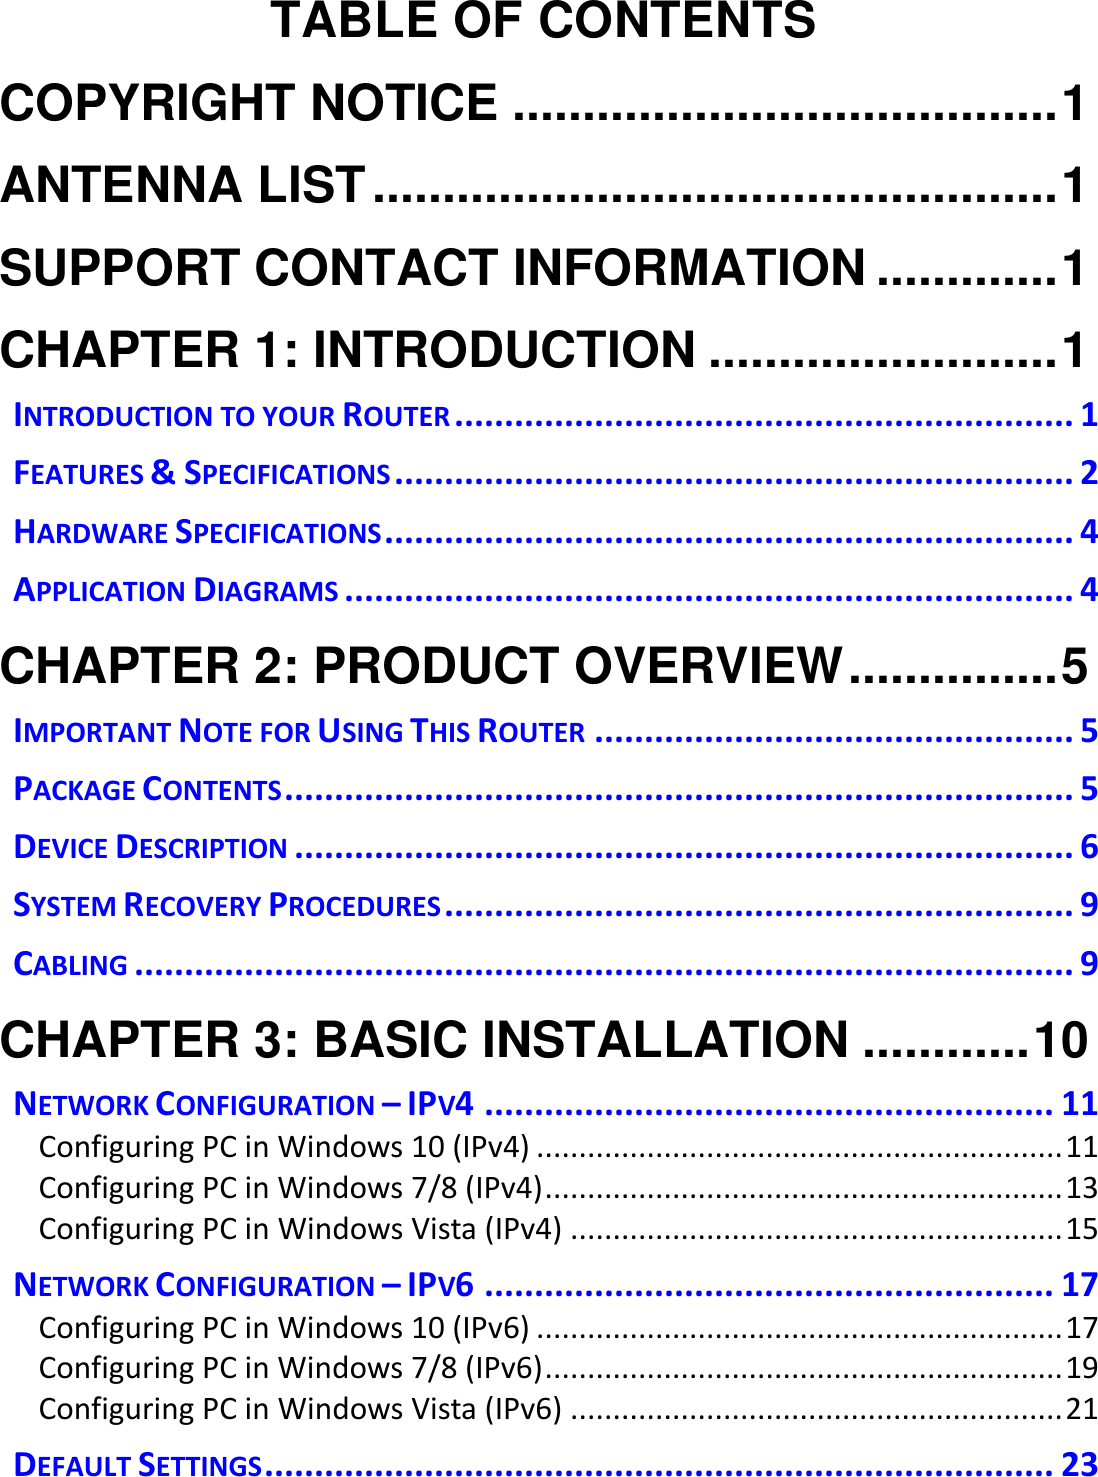   TABLE OF CONTENTS COPYRIGHT NOTICE ....................................... 1 ANTENNA LIST ................................................. 1 SUPPORT CONTACT INFORMATION ............. 1 CHAPTER 1: INTRODUCTION ......................... 1 INTRODUCTION TO YOUR ROUTER .............................................................. 1 FEATURES &amp; SPECIFICATIONS .................................................................... 2 HARDWARE SPECIFICATIONS ..................................................................... 4 APPLICATION DIAGRAMS ......................................................................... 4 CHAPTER 2: PRODUCT OVERVIEW ............... 5 IMPORTANT NOTE FOR USING THIS ROUTER ................................................ 5 PACKAGE CONTENTS ............................................................................... 5 DEVICE DESCRIPTION .............................................................................. 6 SYSTEM RECOVERY PROCEDURES ............................................................... 9 CABLING .............................................................................................. 9 CHAPTER 3: BASIC INSTALLATION ............ 10 NETWORK CONFIGURATION – IPV4 ......................................................... 11 Configuring PC in Windows 10 (IPv4) .............................................................. 11 Configuring PC in Windows 7/8 (IPv4) ............................................................. 13 Configuring PC in Windows Vista (IPv4) .......................................................... 15 NETWORK CONFIGURATION – IPV6 ......................................................... 17 Configuring PC in Windows 10 (IPv6) .............................................................. 17 Configuring PC in Windows 7/8 (IPv6) ............................................................. 19 Configuring PC in Windows Vista (IPv6) .......................................................... 21 DEFAULT SETTINGS ............................................................................... 23 